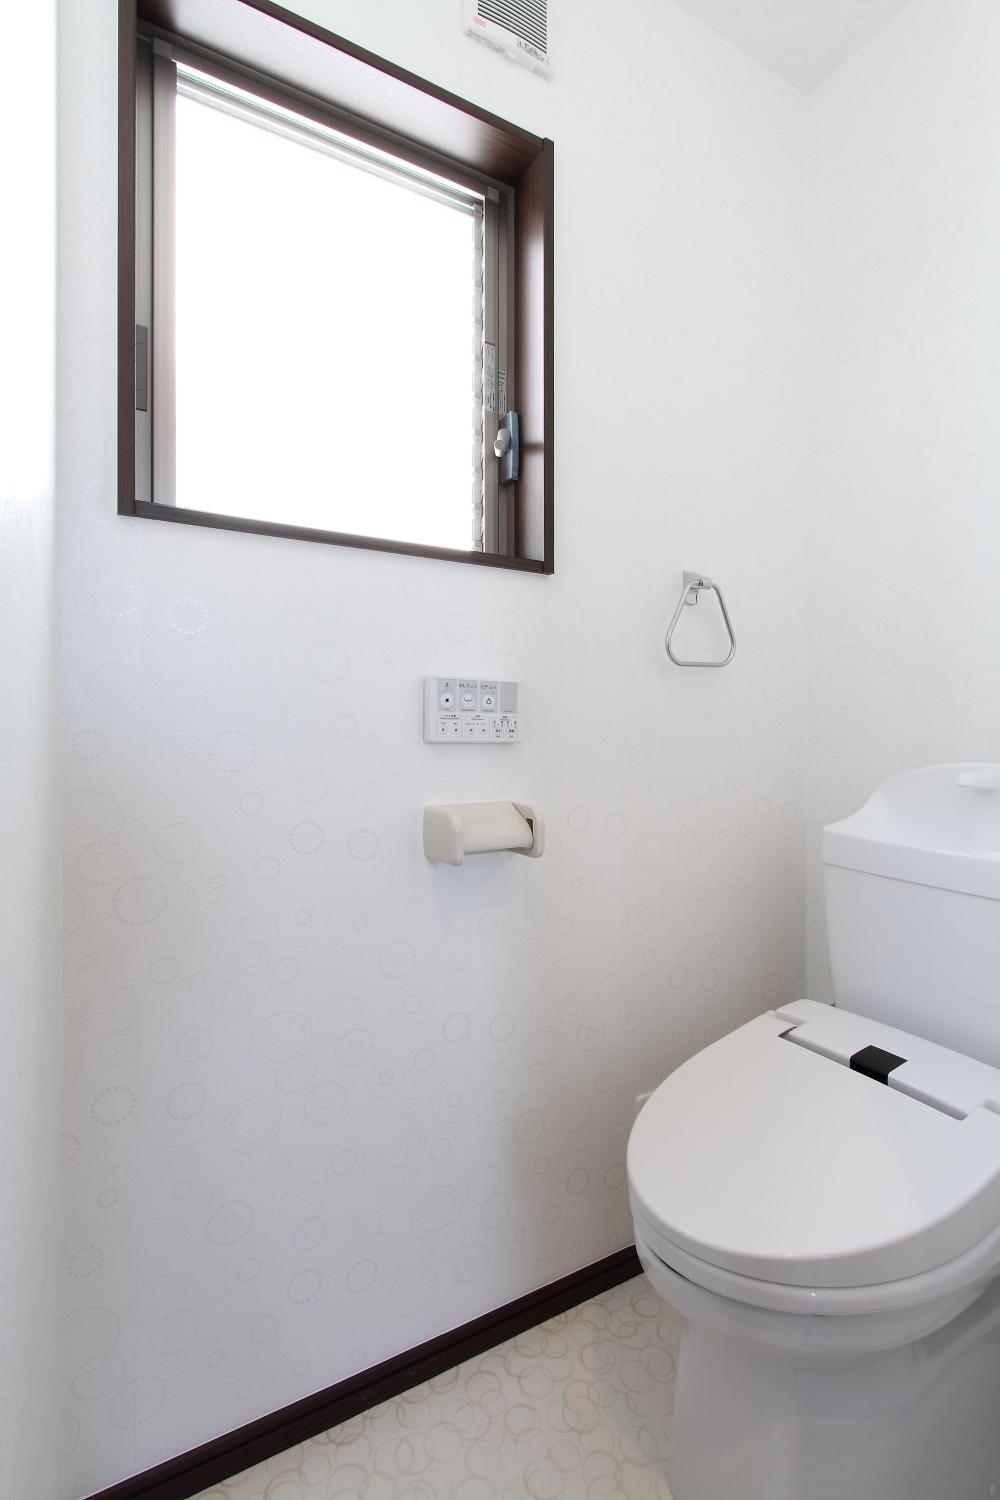 Building plan example (introspection photo). Toilet bathed in light from the window